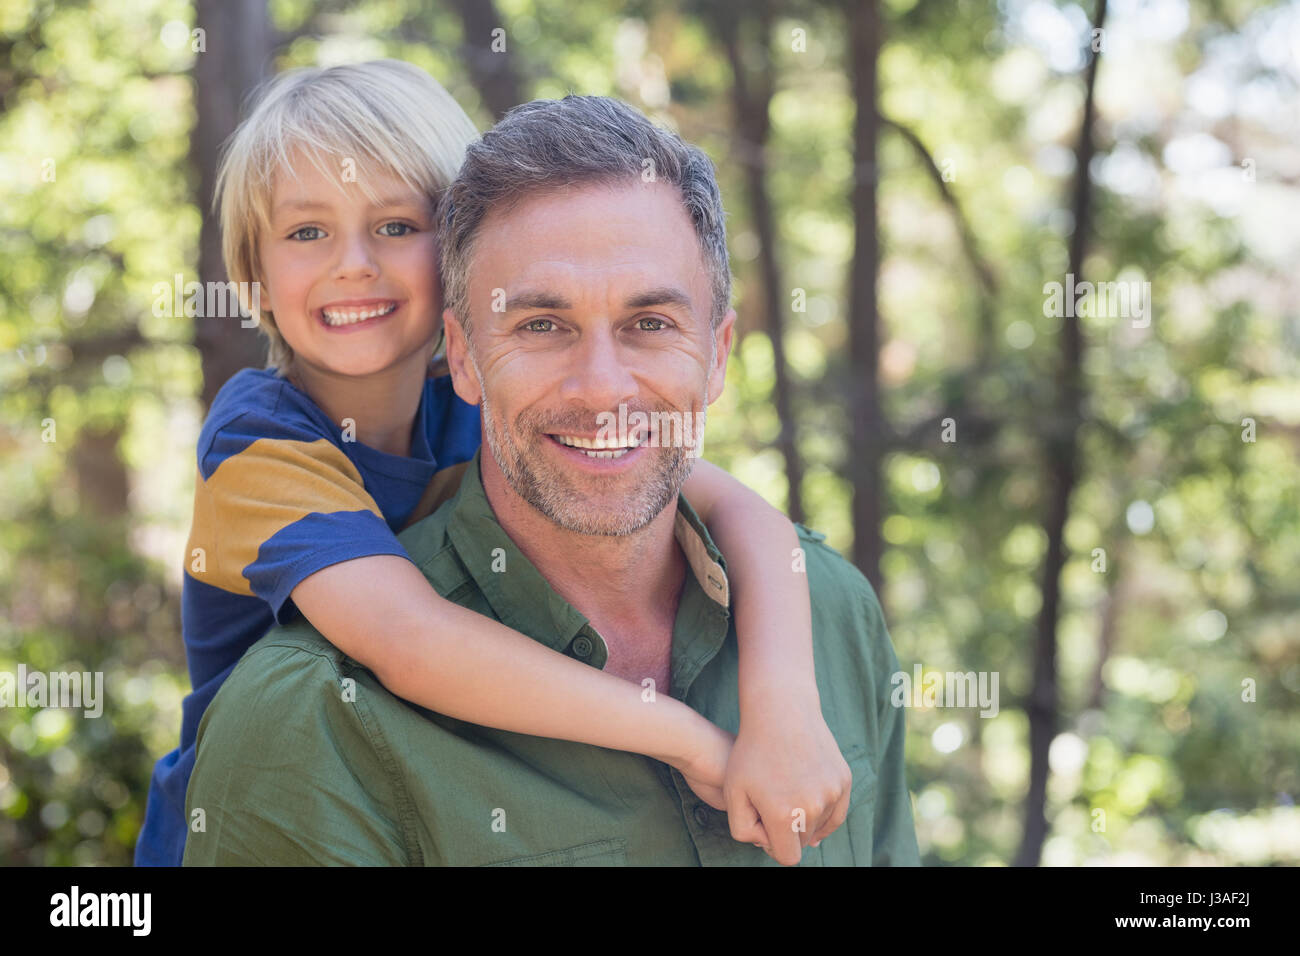 Portrait of smiling father piggybacking son in forest Stock Photo